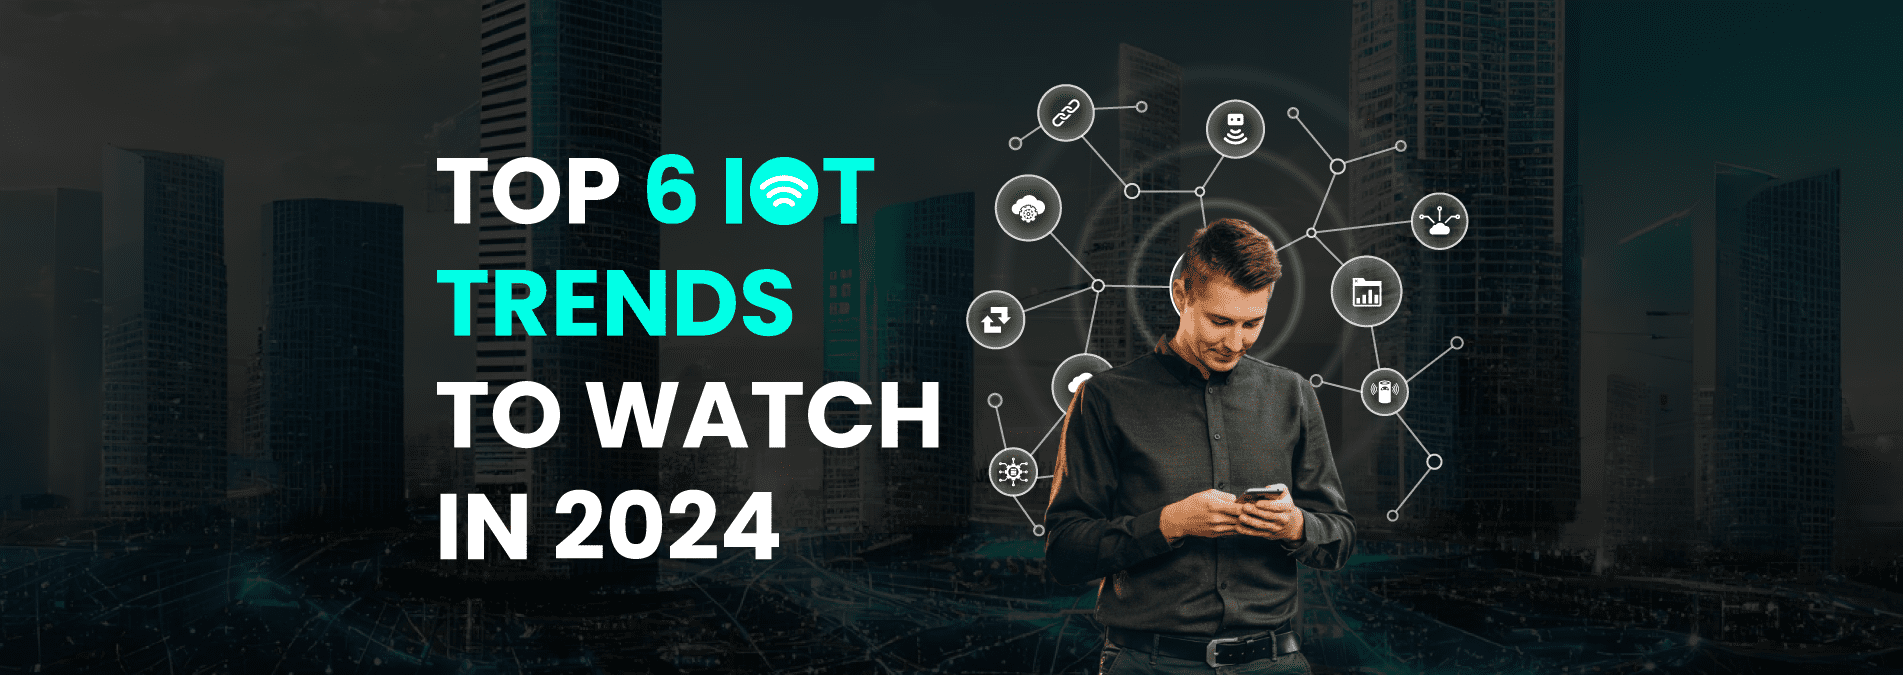 Top 6 IoT Trends to Watch In 2024 - Internet Soft